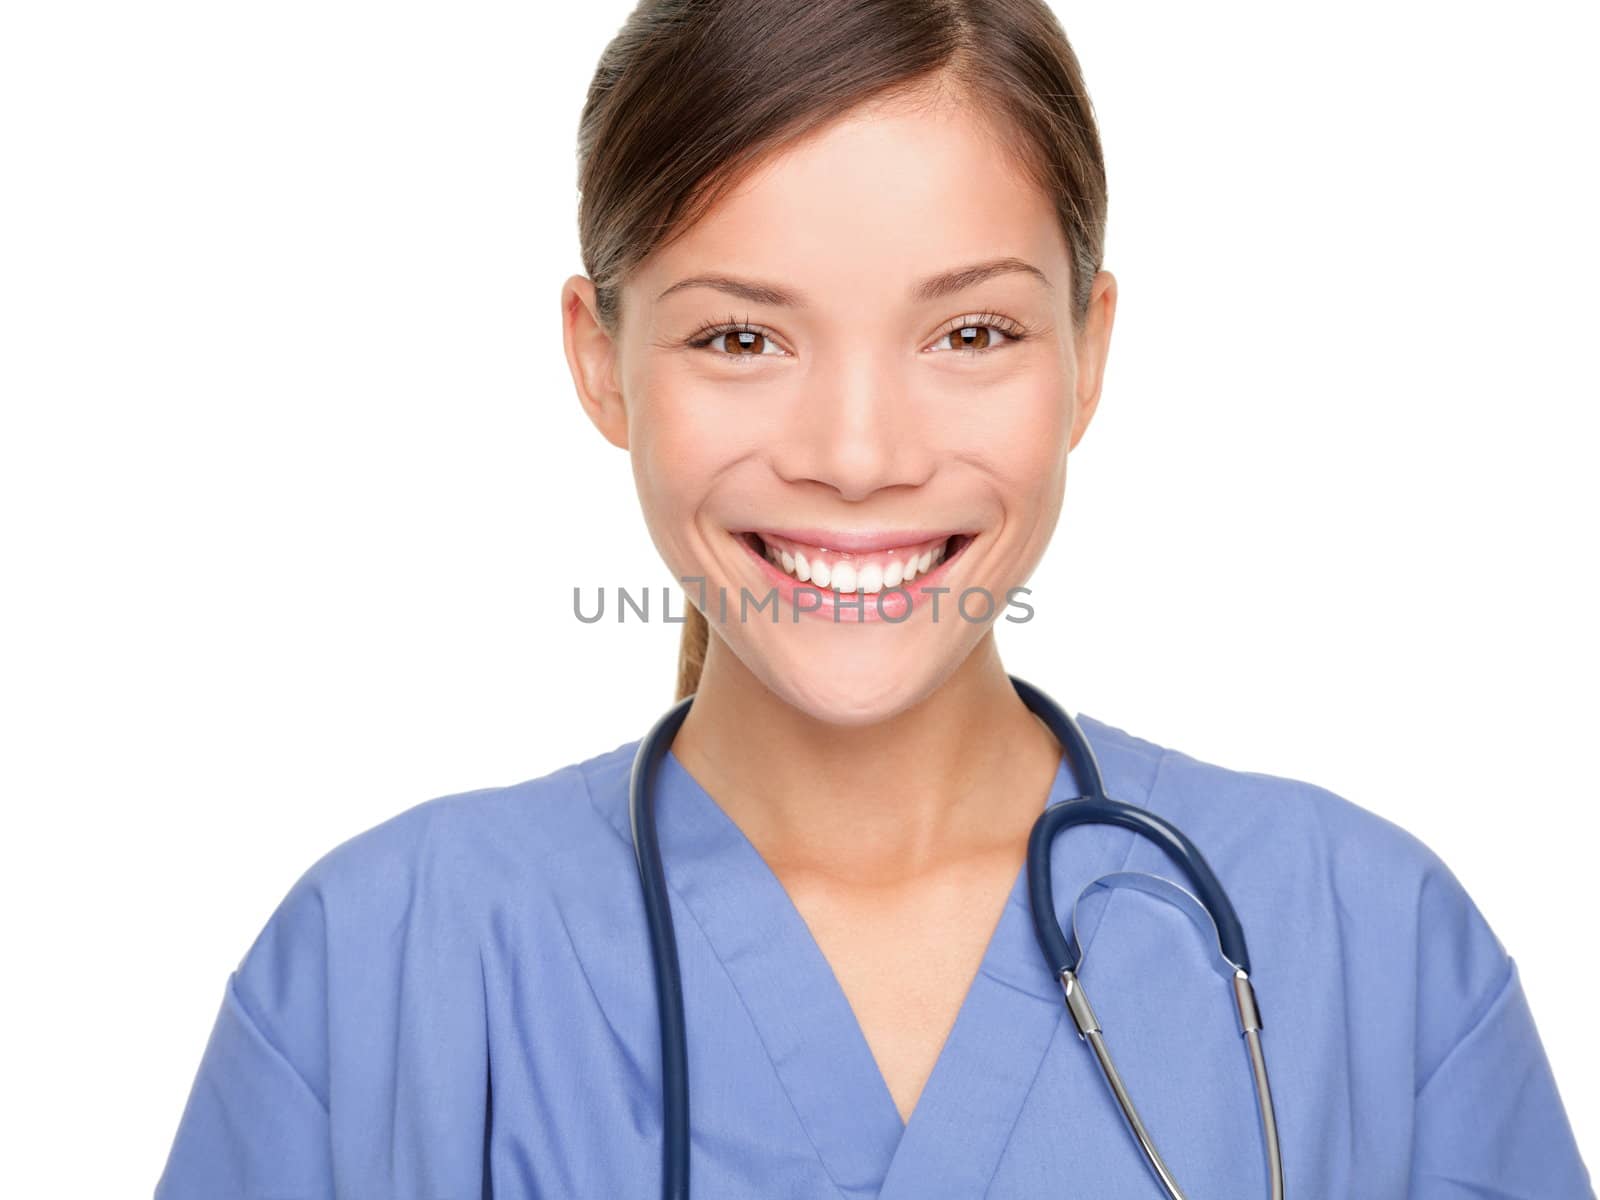 Cute asian nurse / doctor woman smiling isolated on white background. Medical people portrait.